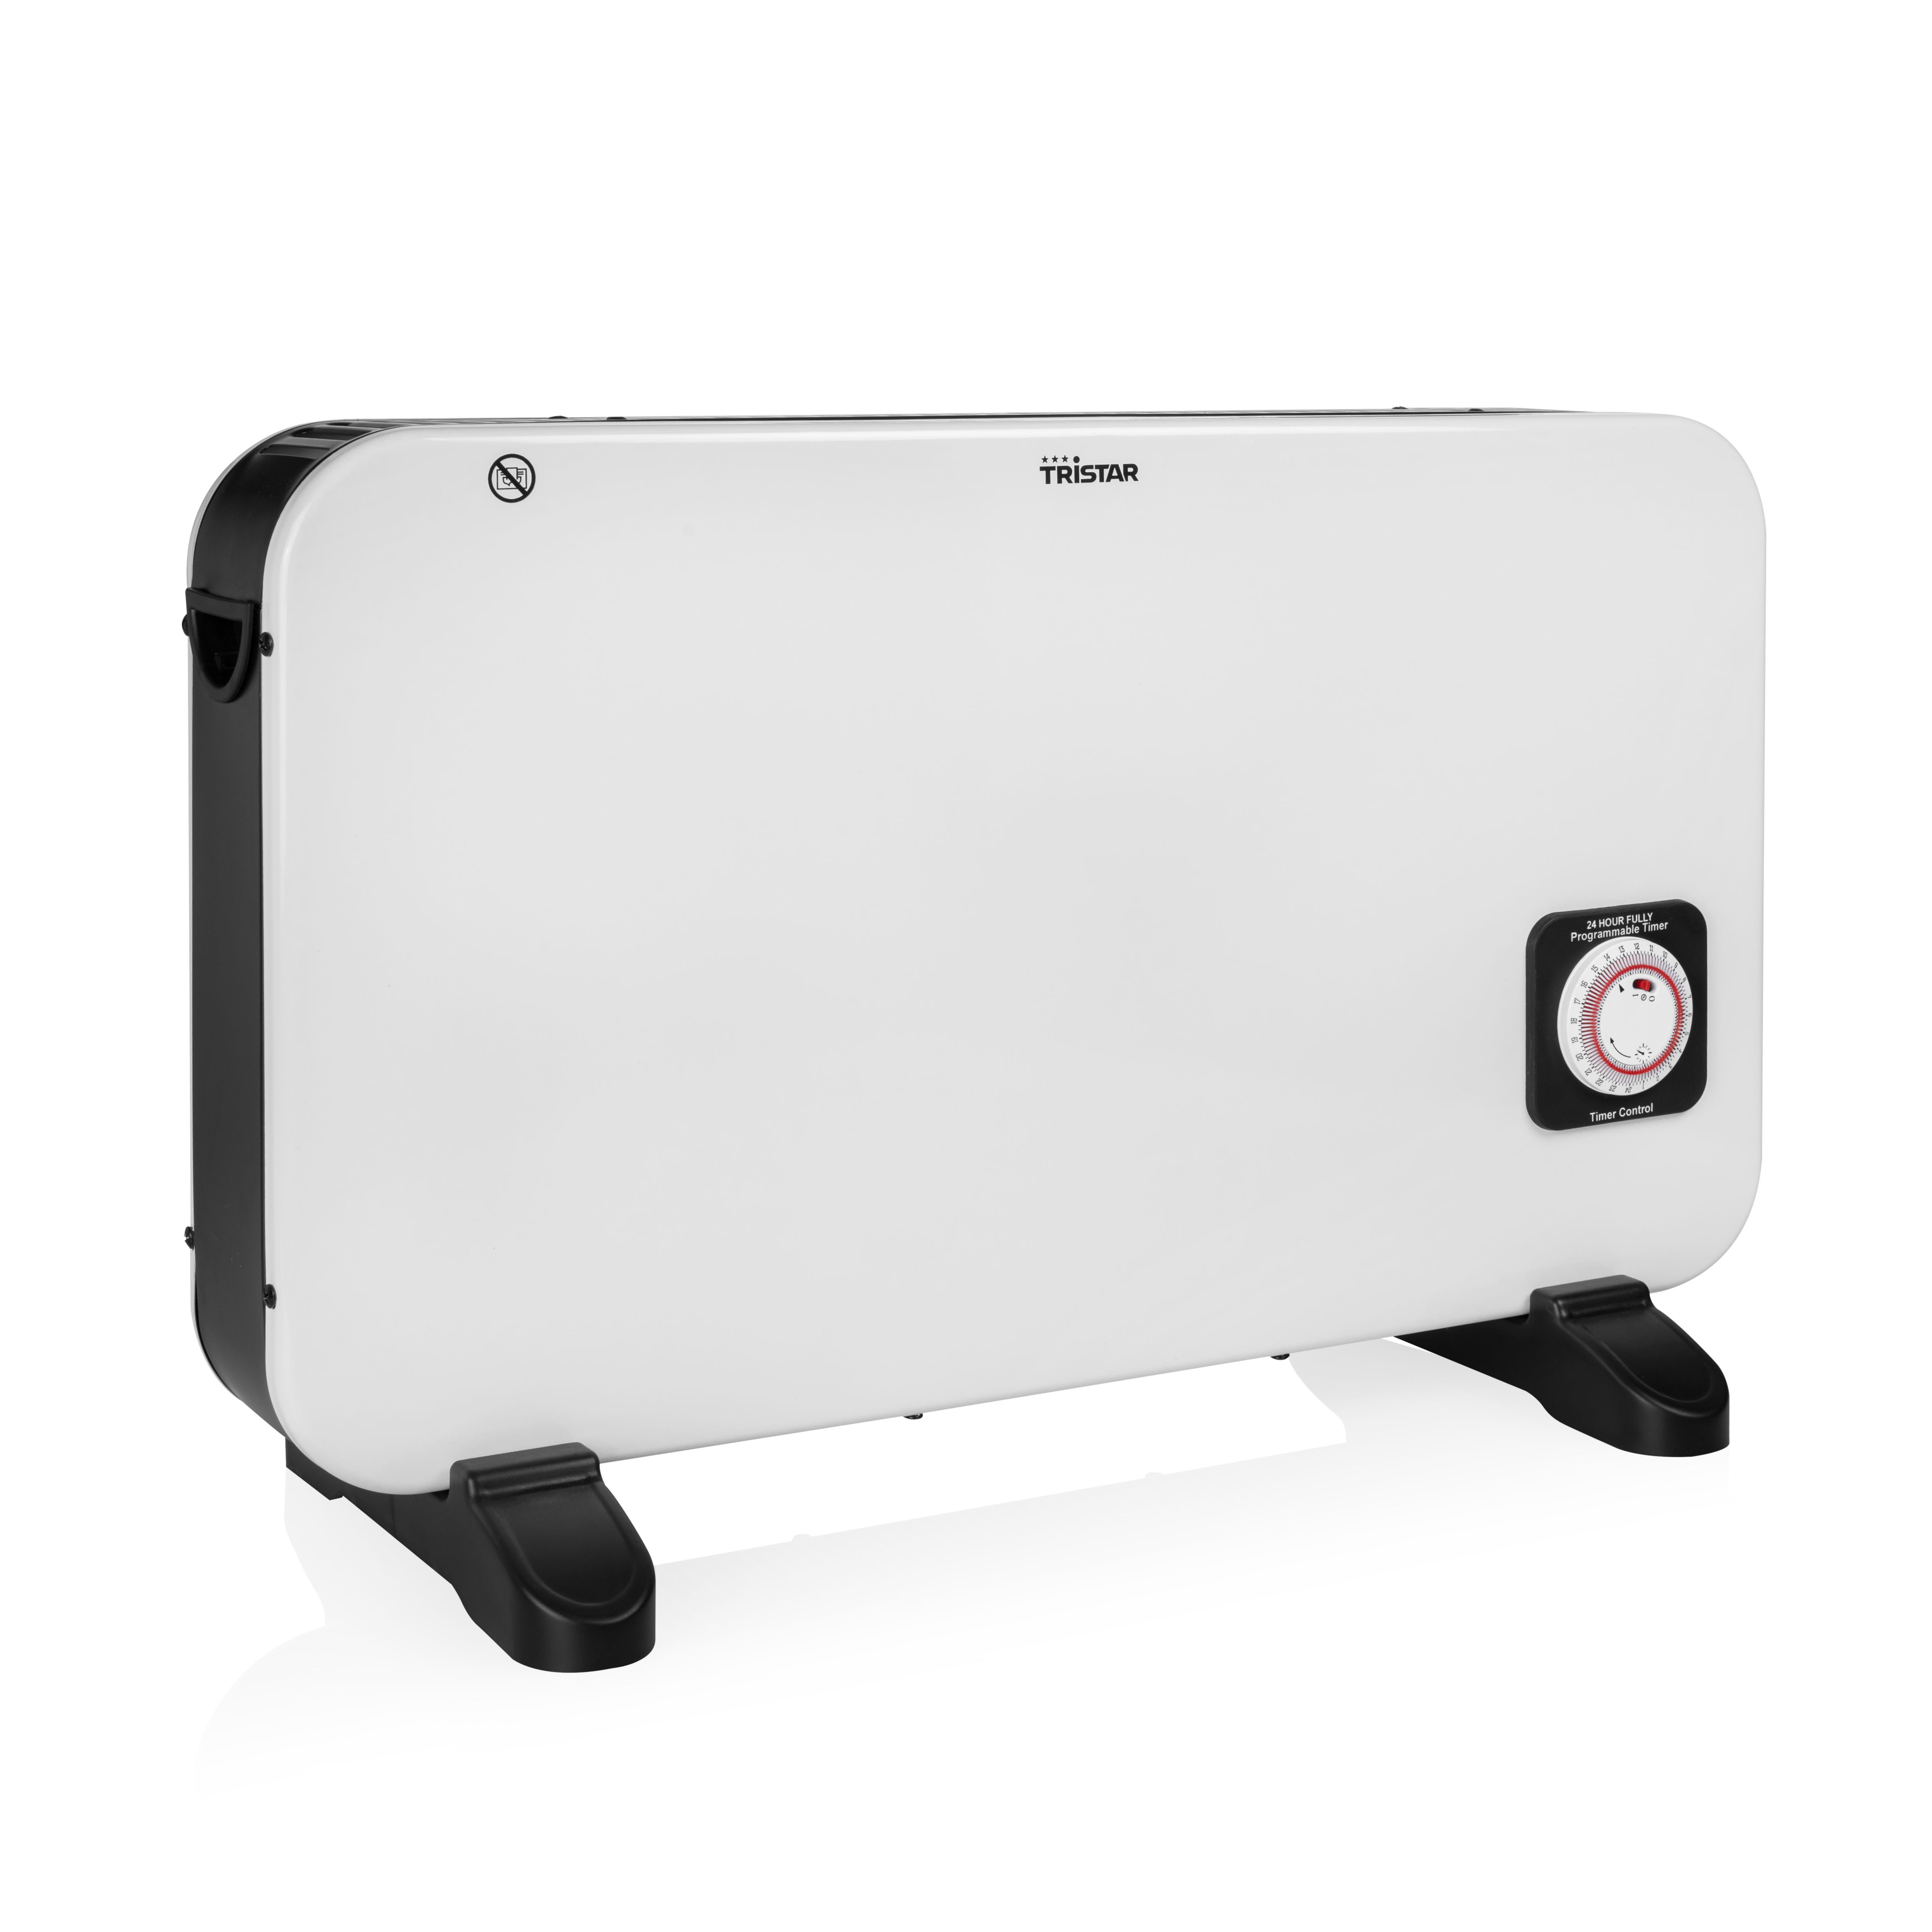 Tristar 2000W White Convector heater With timer function